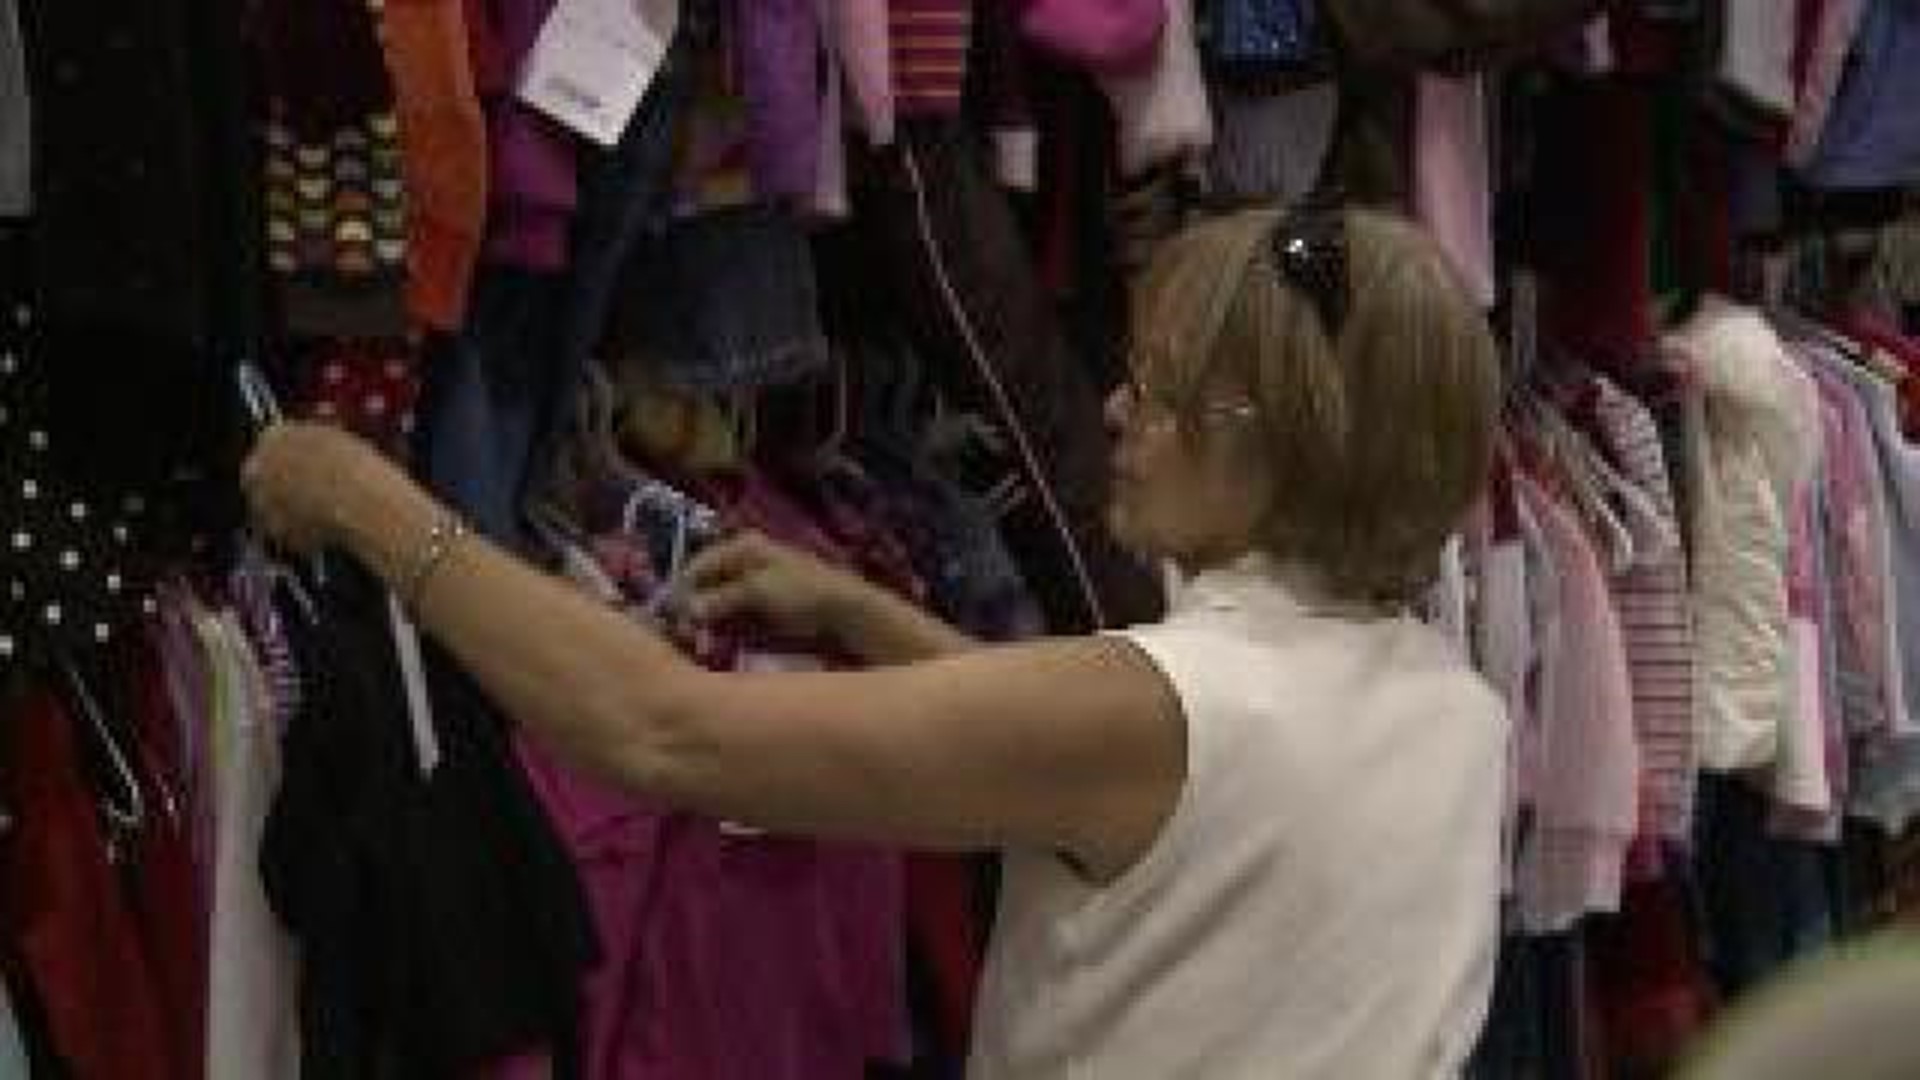 Parents Search for Best Bargains at Consignment Sale